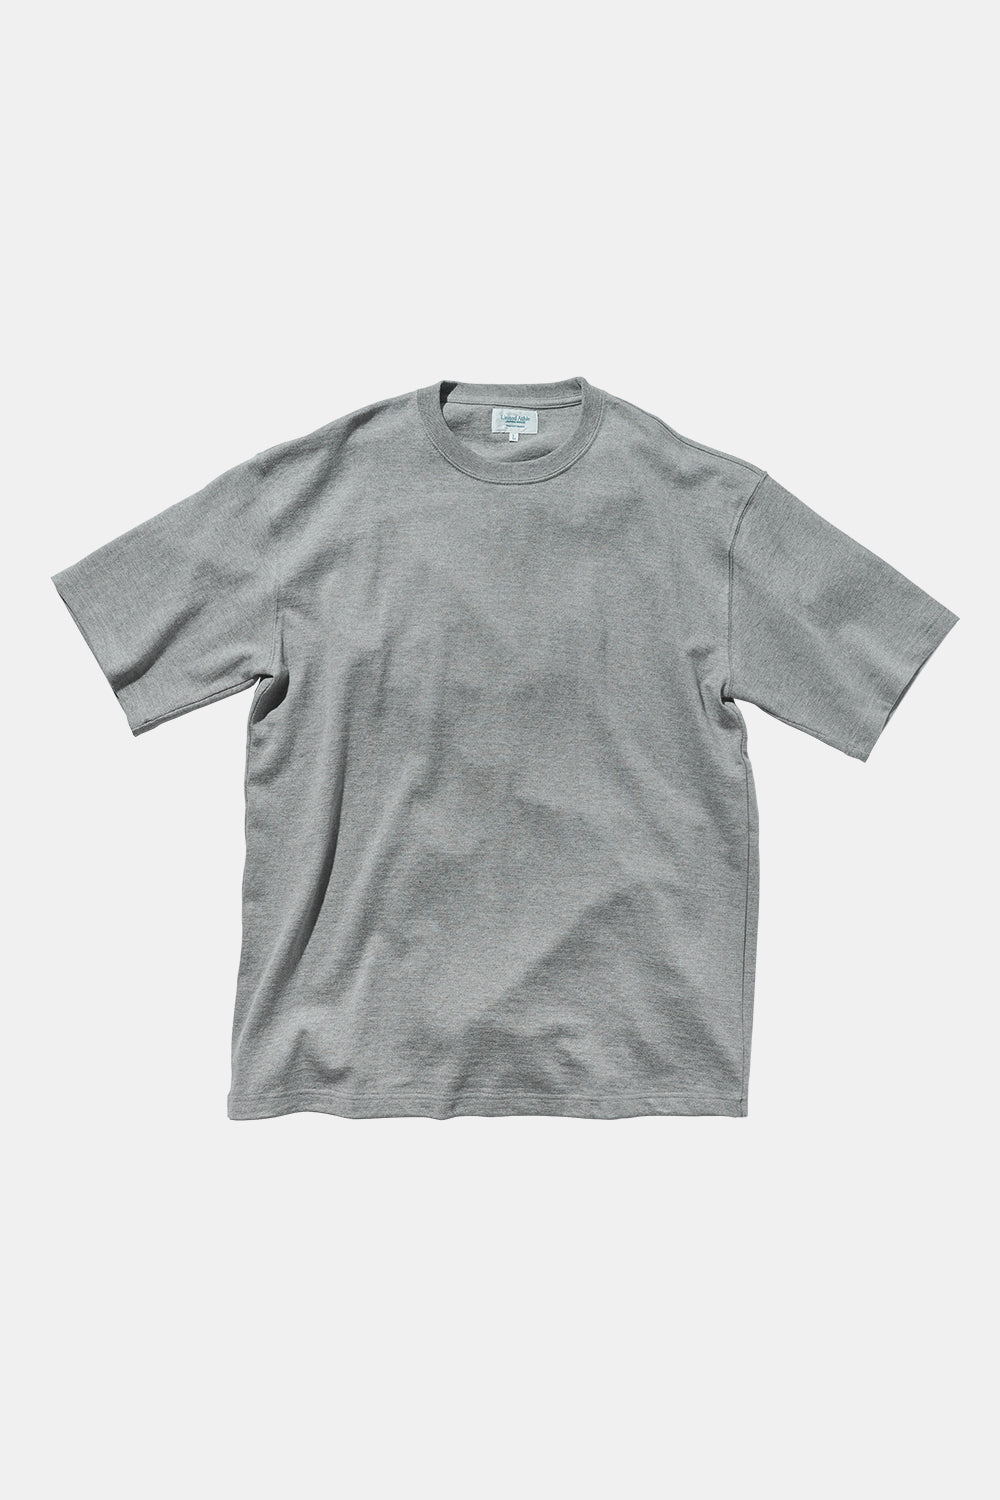 United Athle Japan Made Standard Fit Short Sleeve T-shirt (Grey)